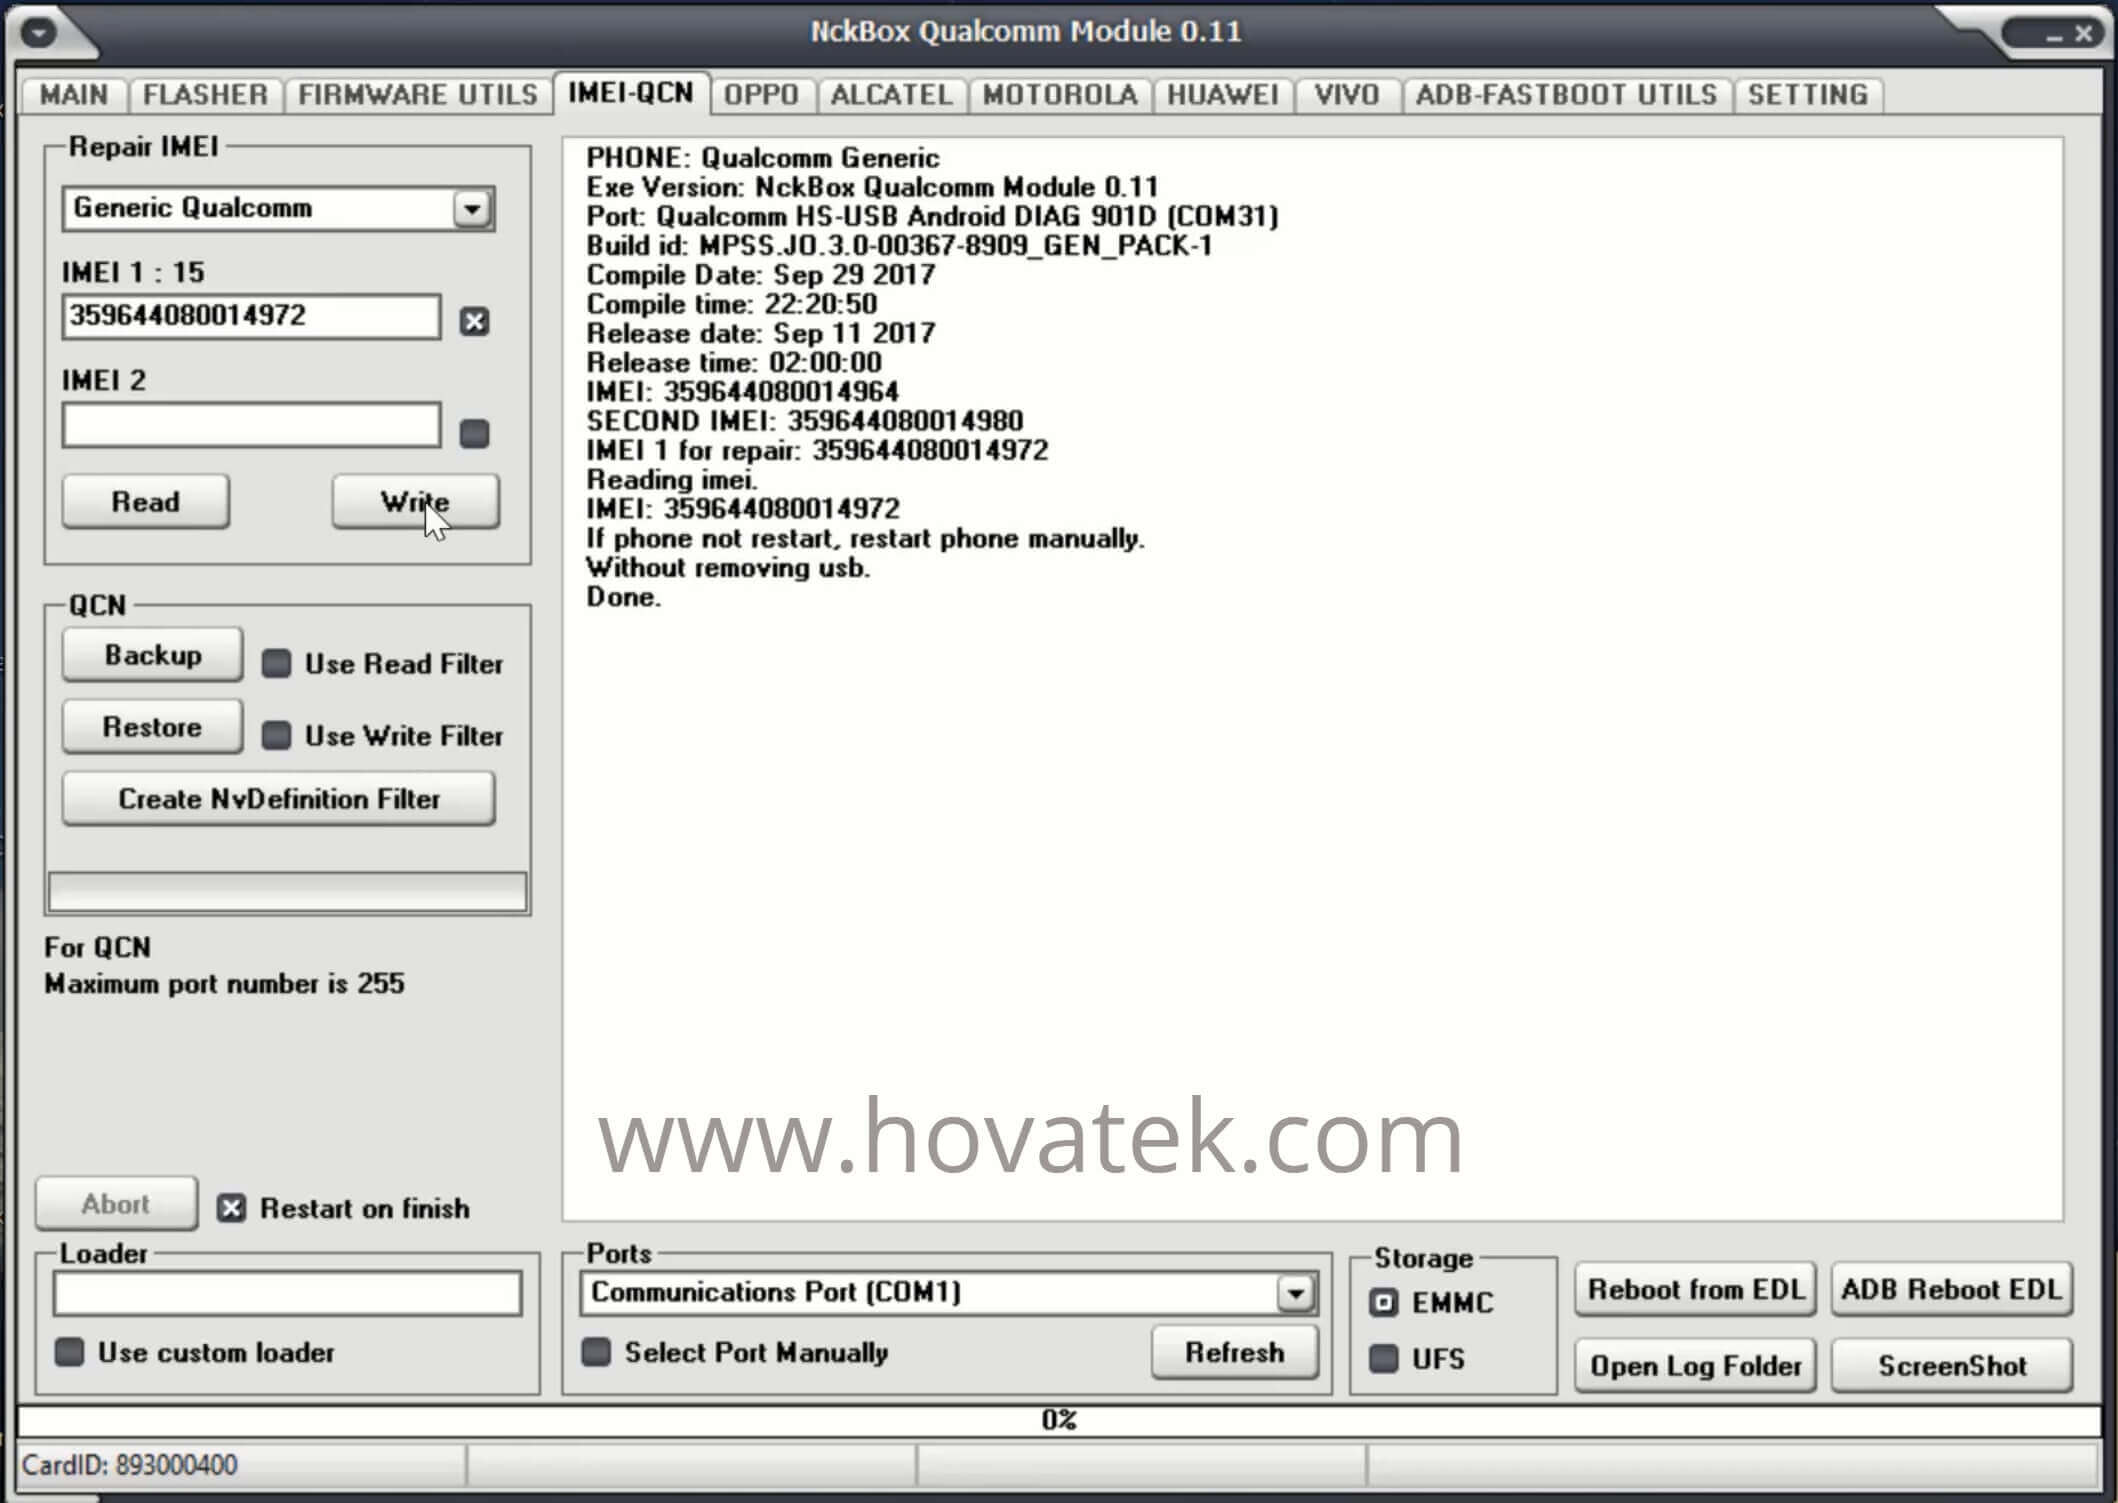 How to use NCK Pro Box to write IMEI to Qualcomm